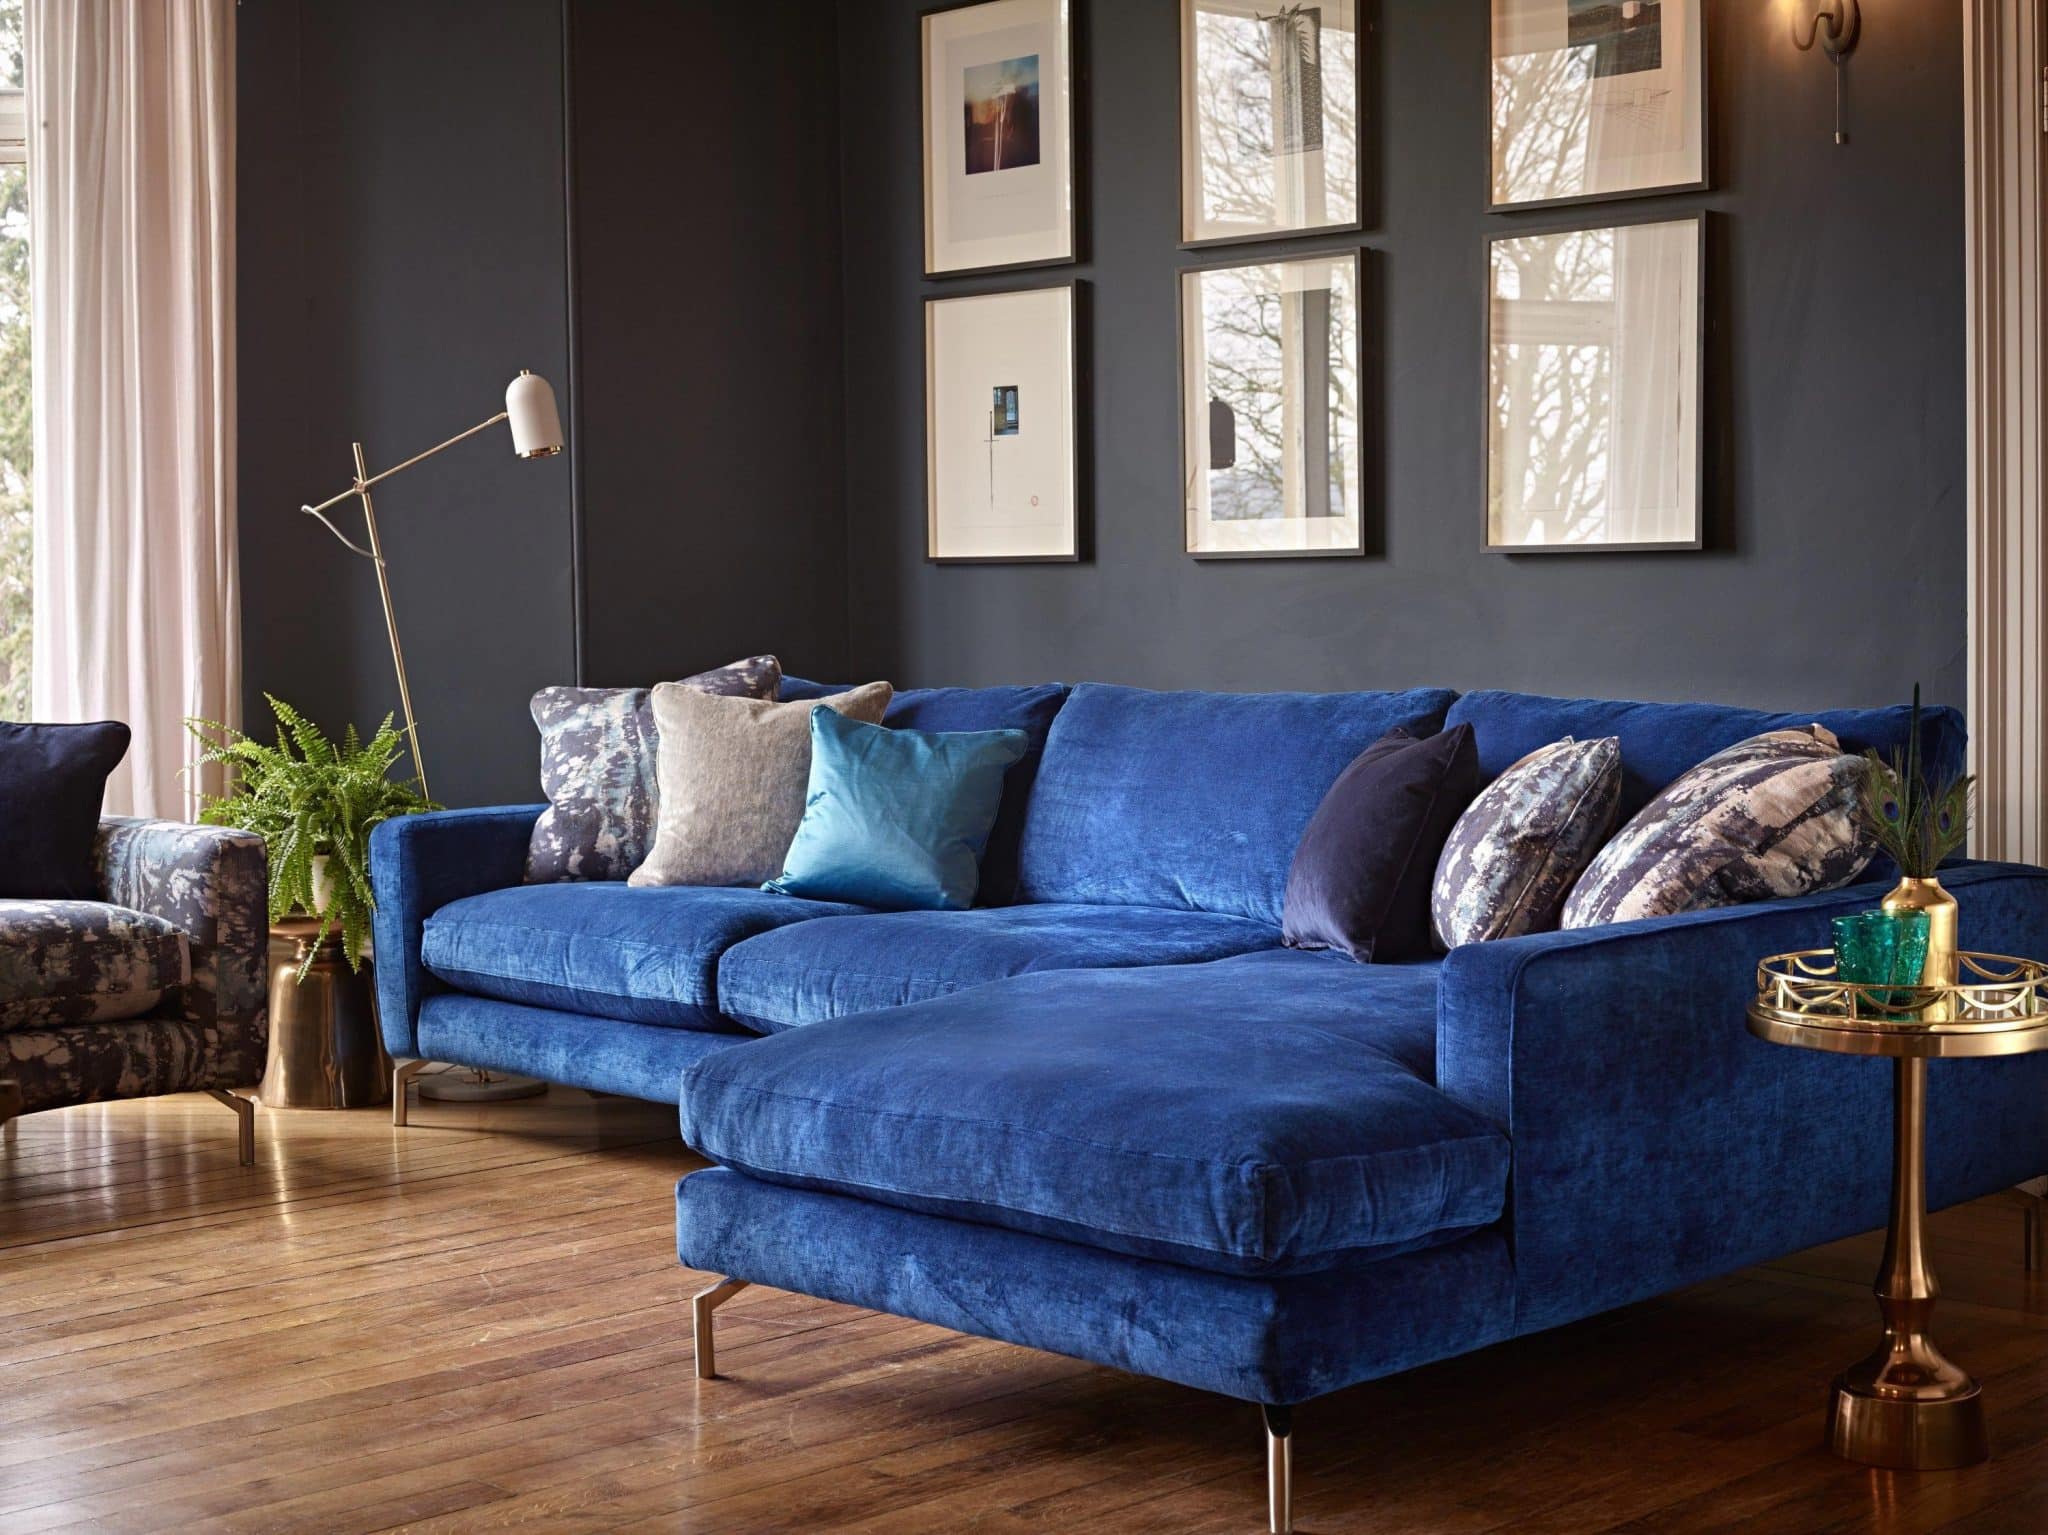 How to Style a Blue Velvet Sofa in a Modern Living Room